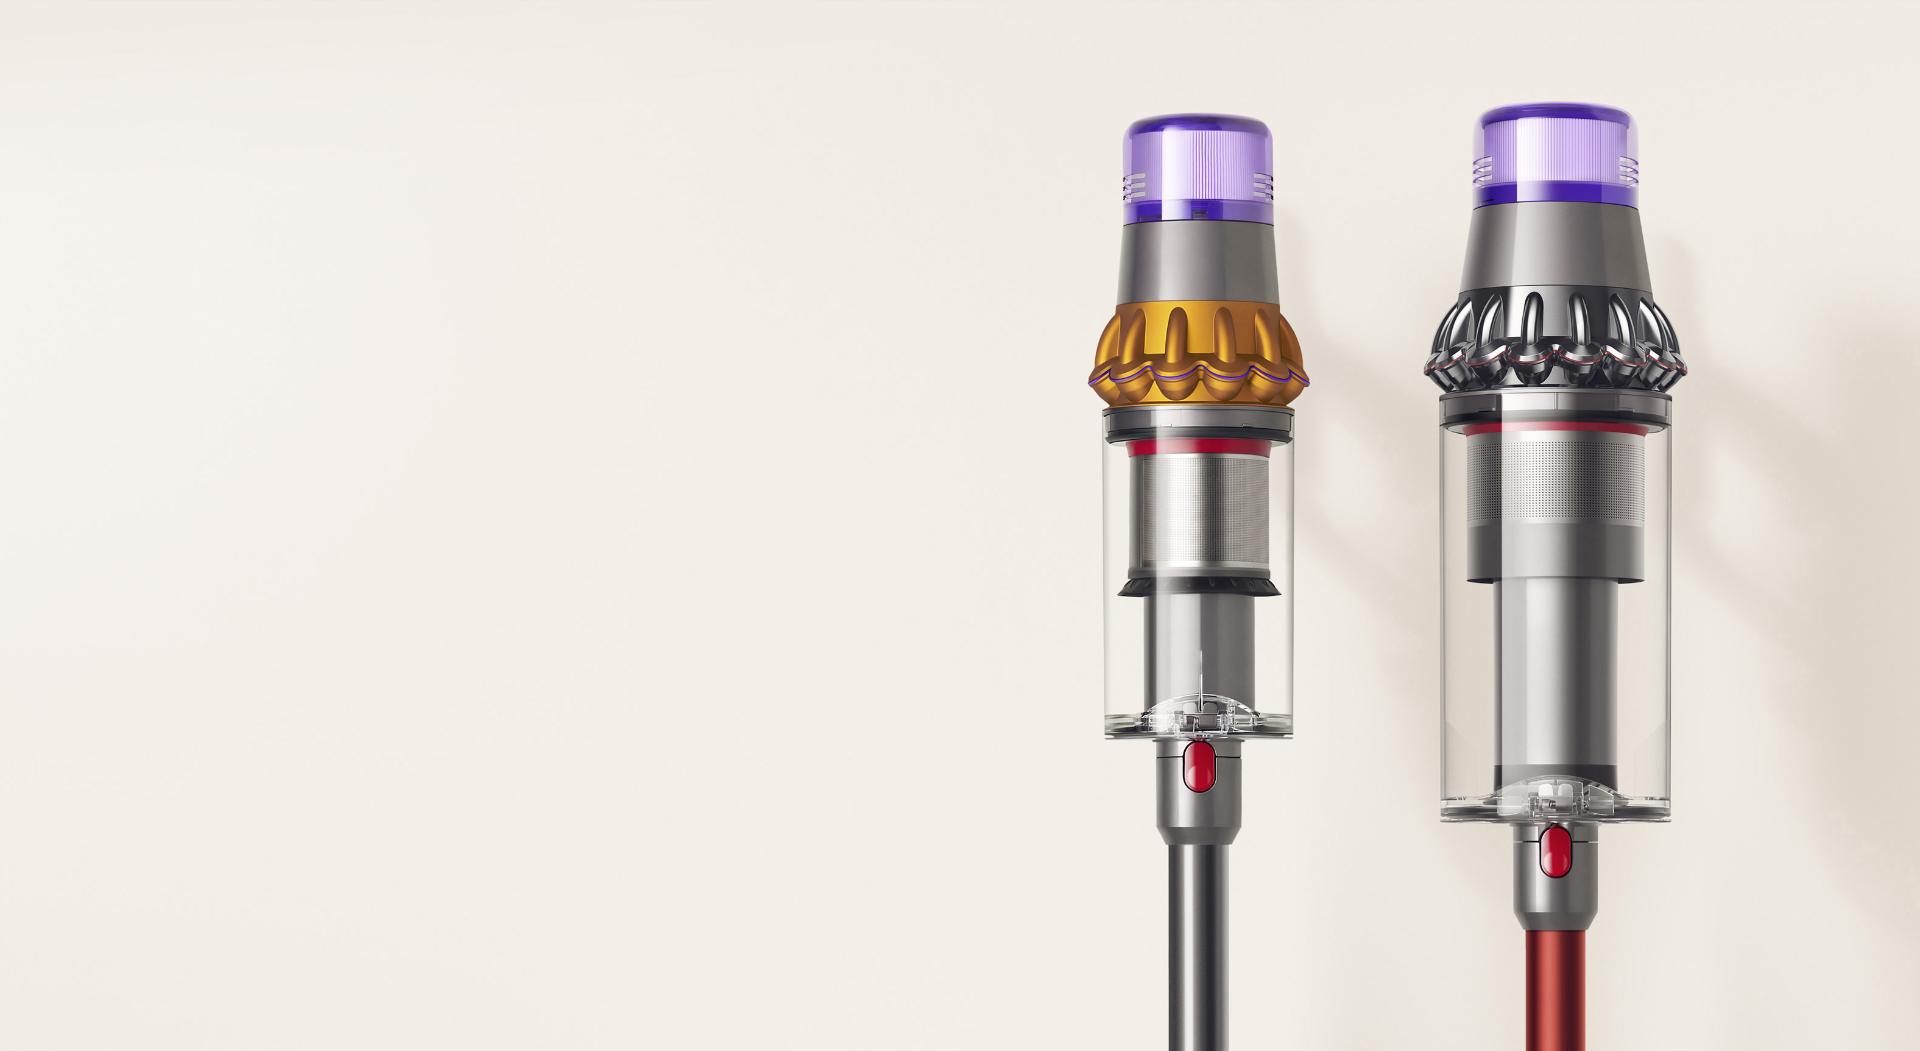 Dyson Outsize vacuum with 150% bigger bin next to a Dyson V11 Absolute vacuum bin